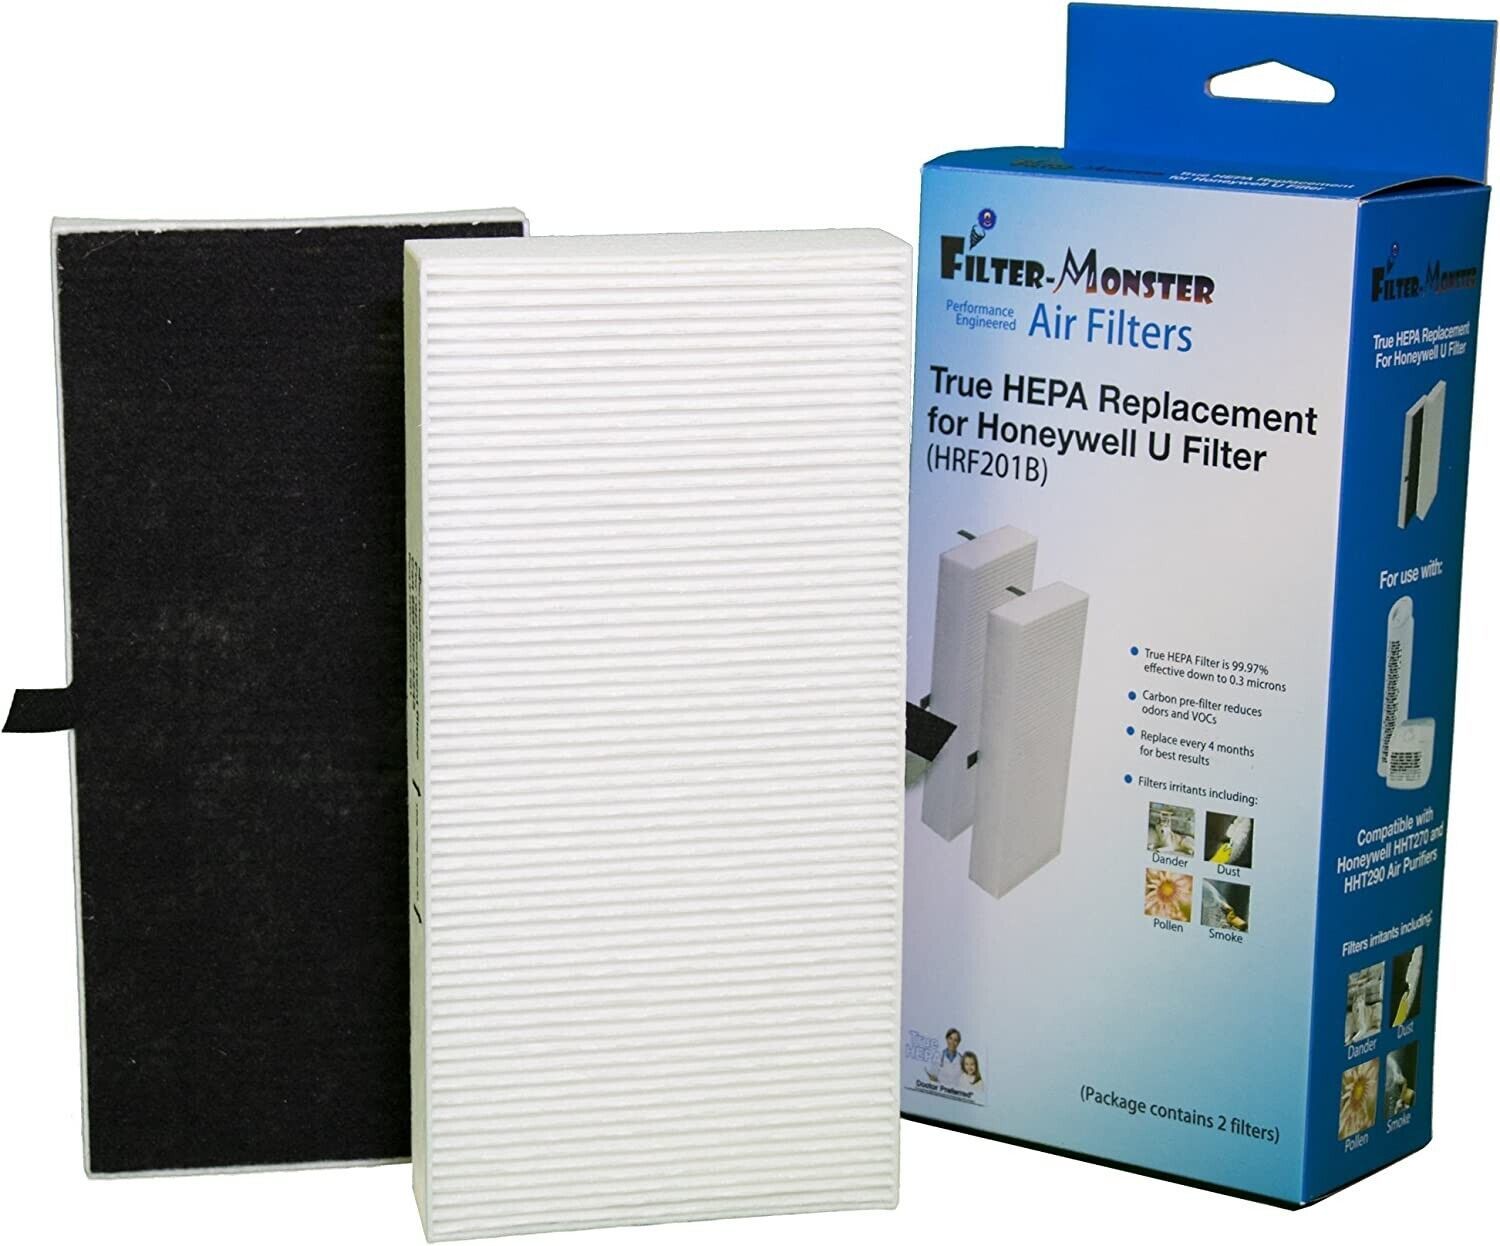 Primary image for Filter-Monster True HEPA Replacement Filter Compatible with Honeywell U Filter